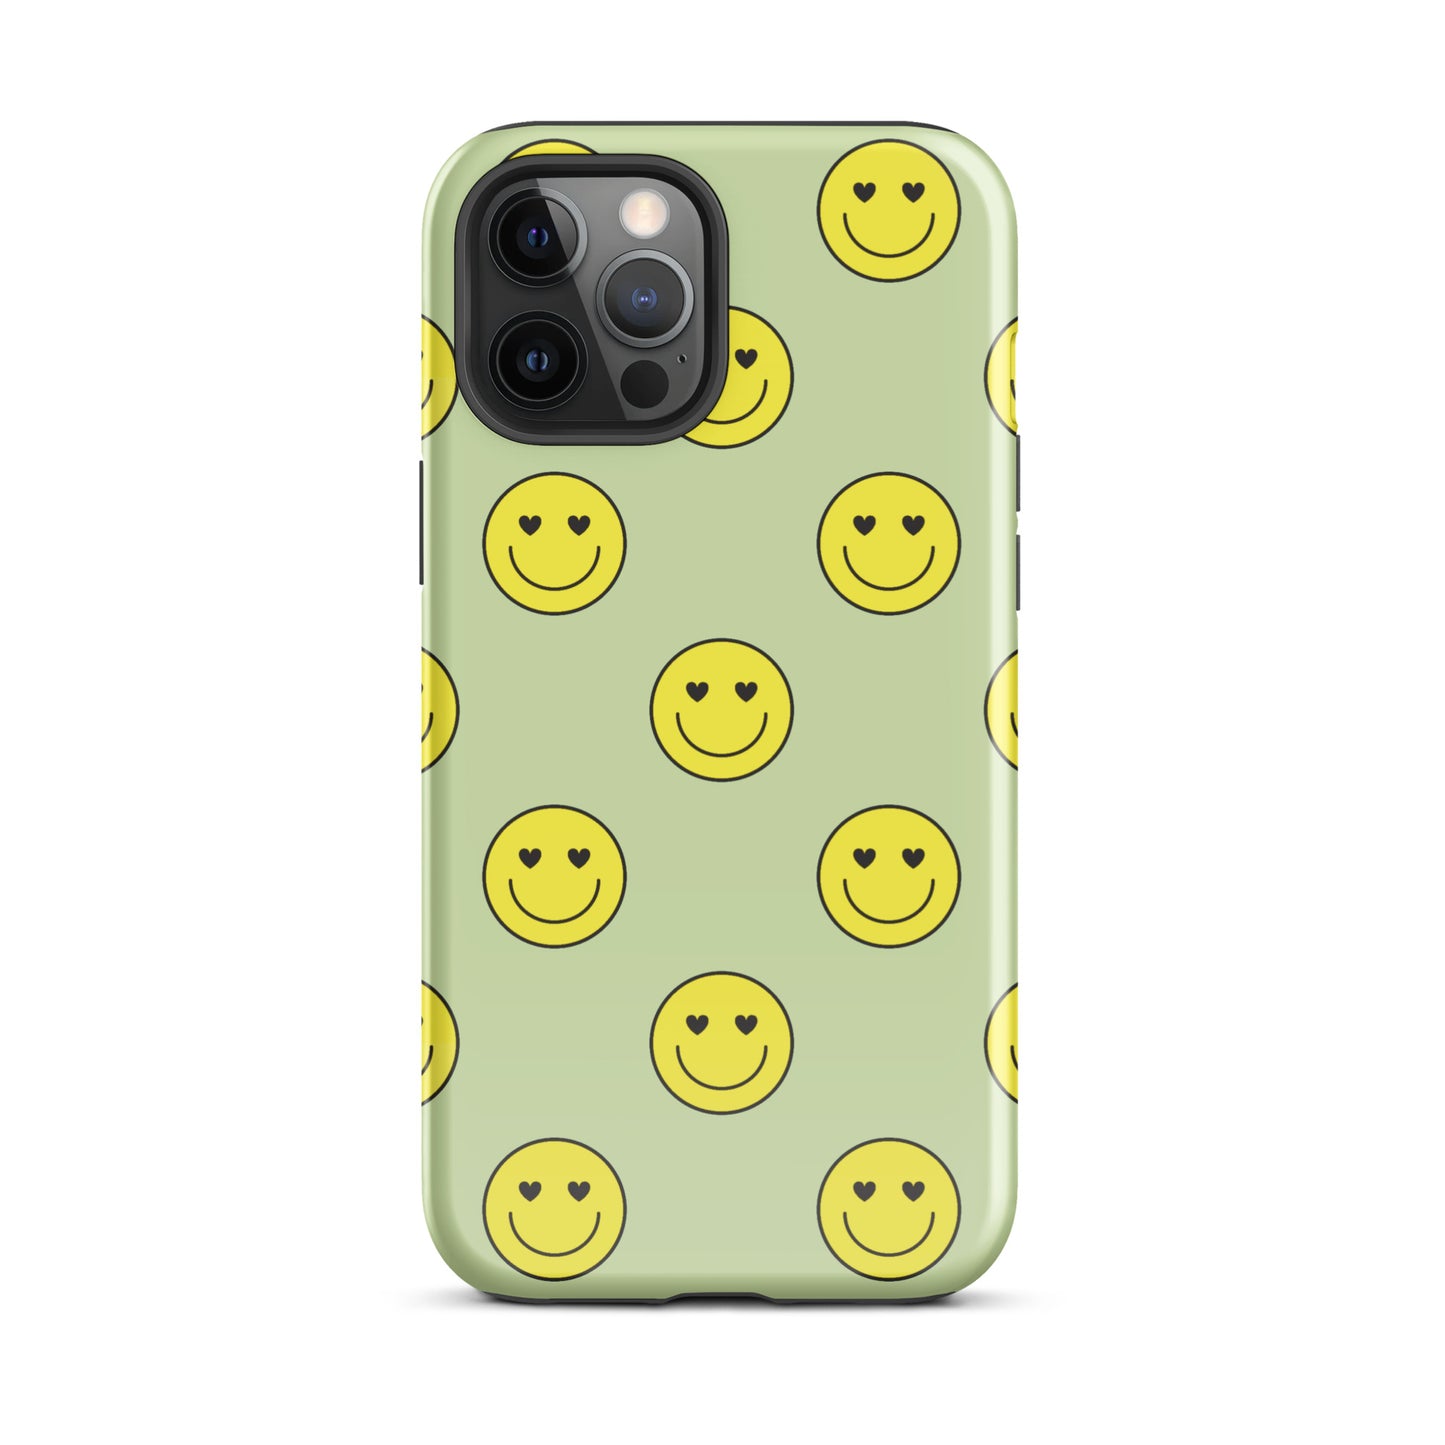 Neon Smiley Faces iPhone Case iPhone 12 Pro Max Glossy